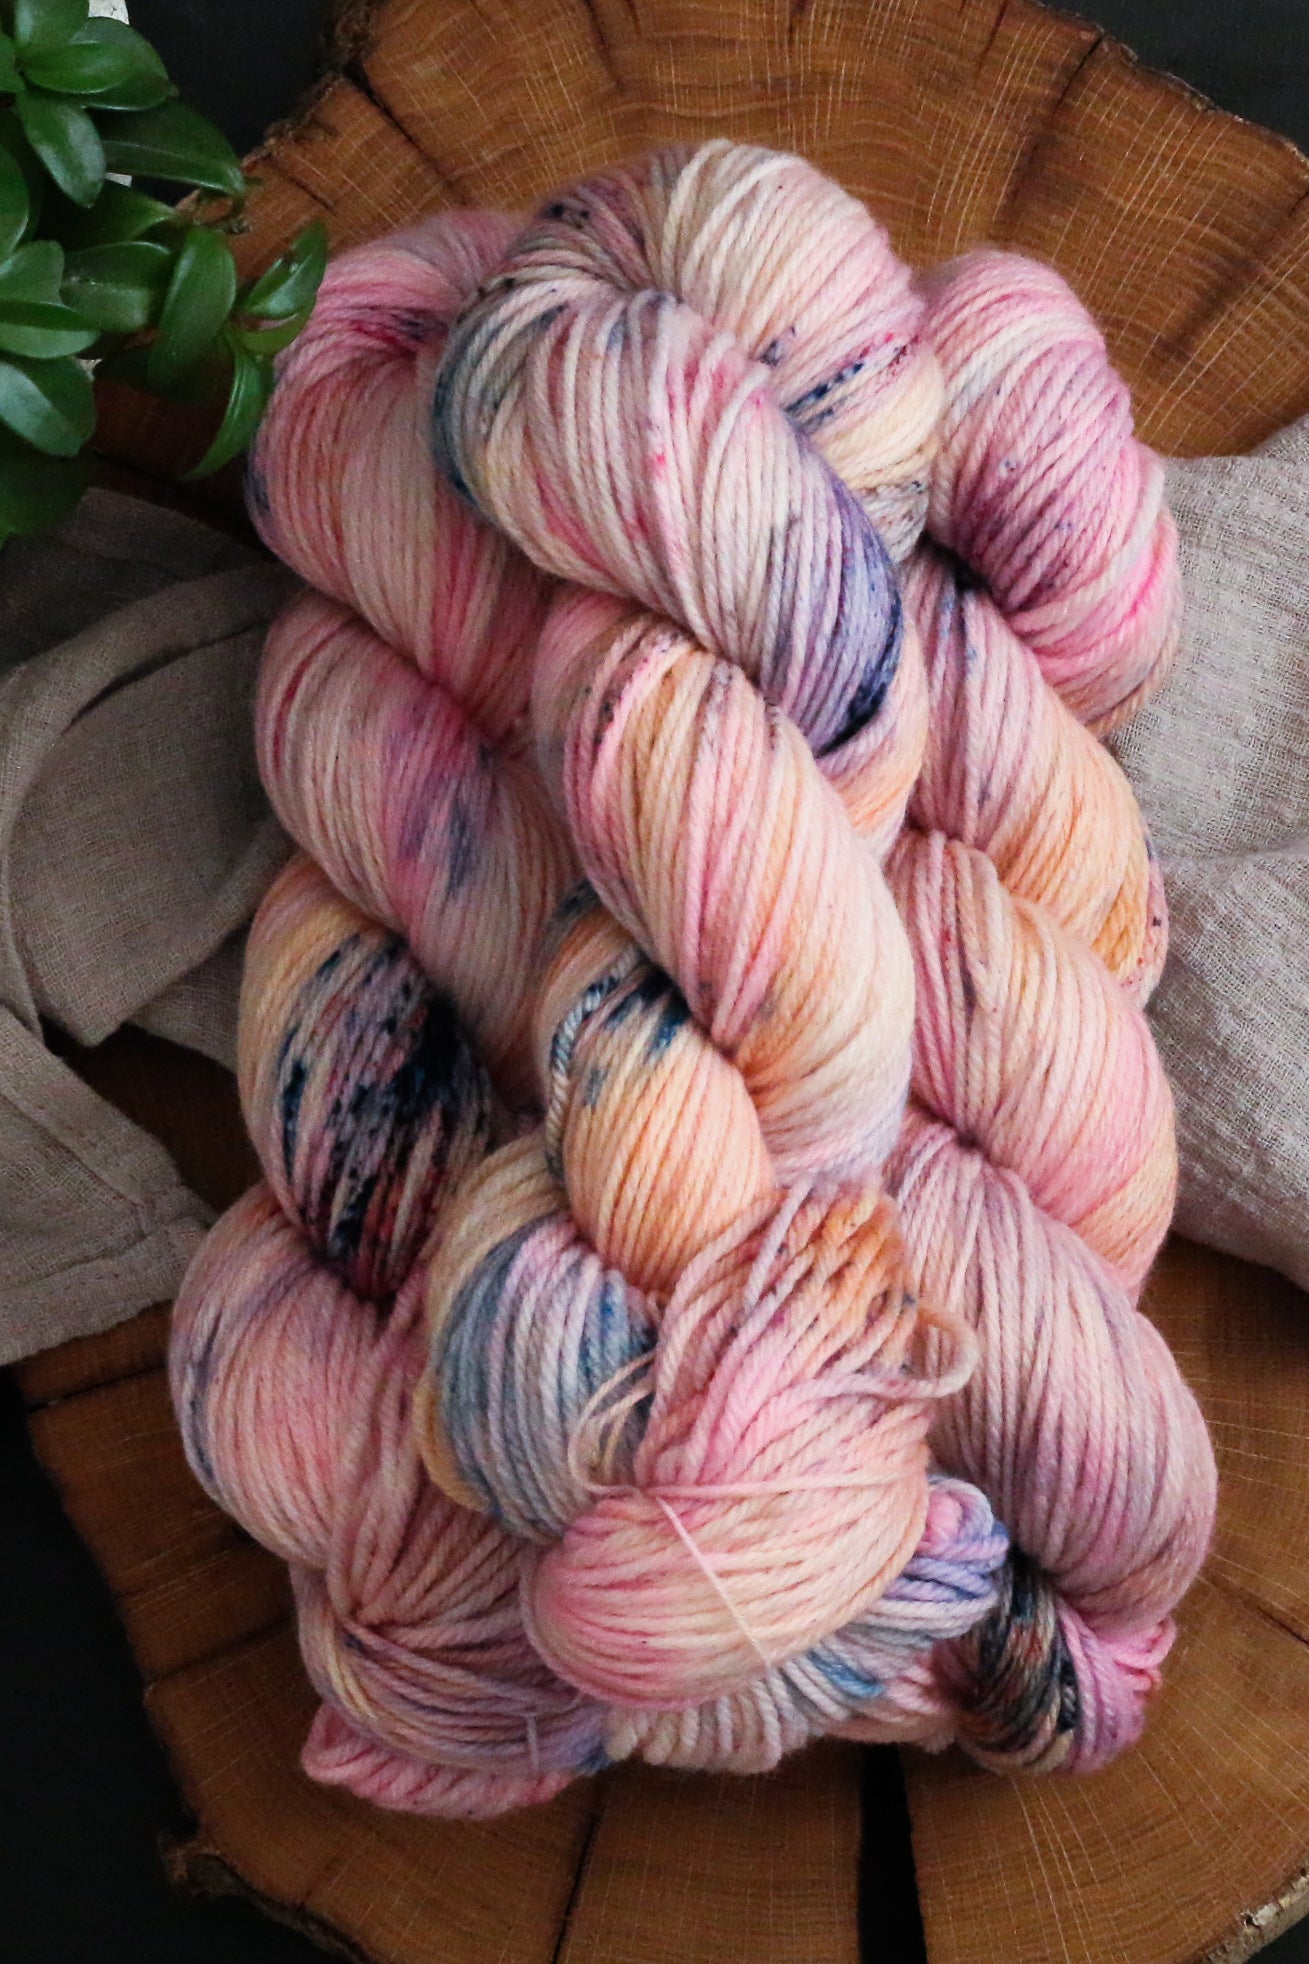 Girlfriend - Sweater Quantity and Dyed to Order